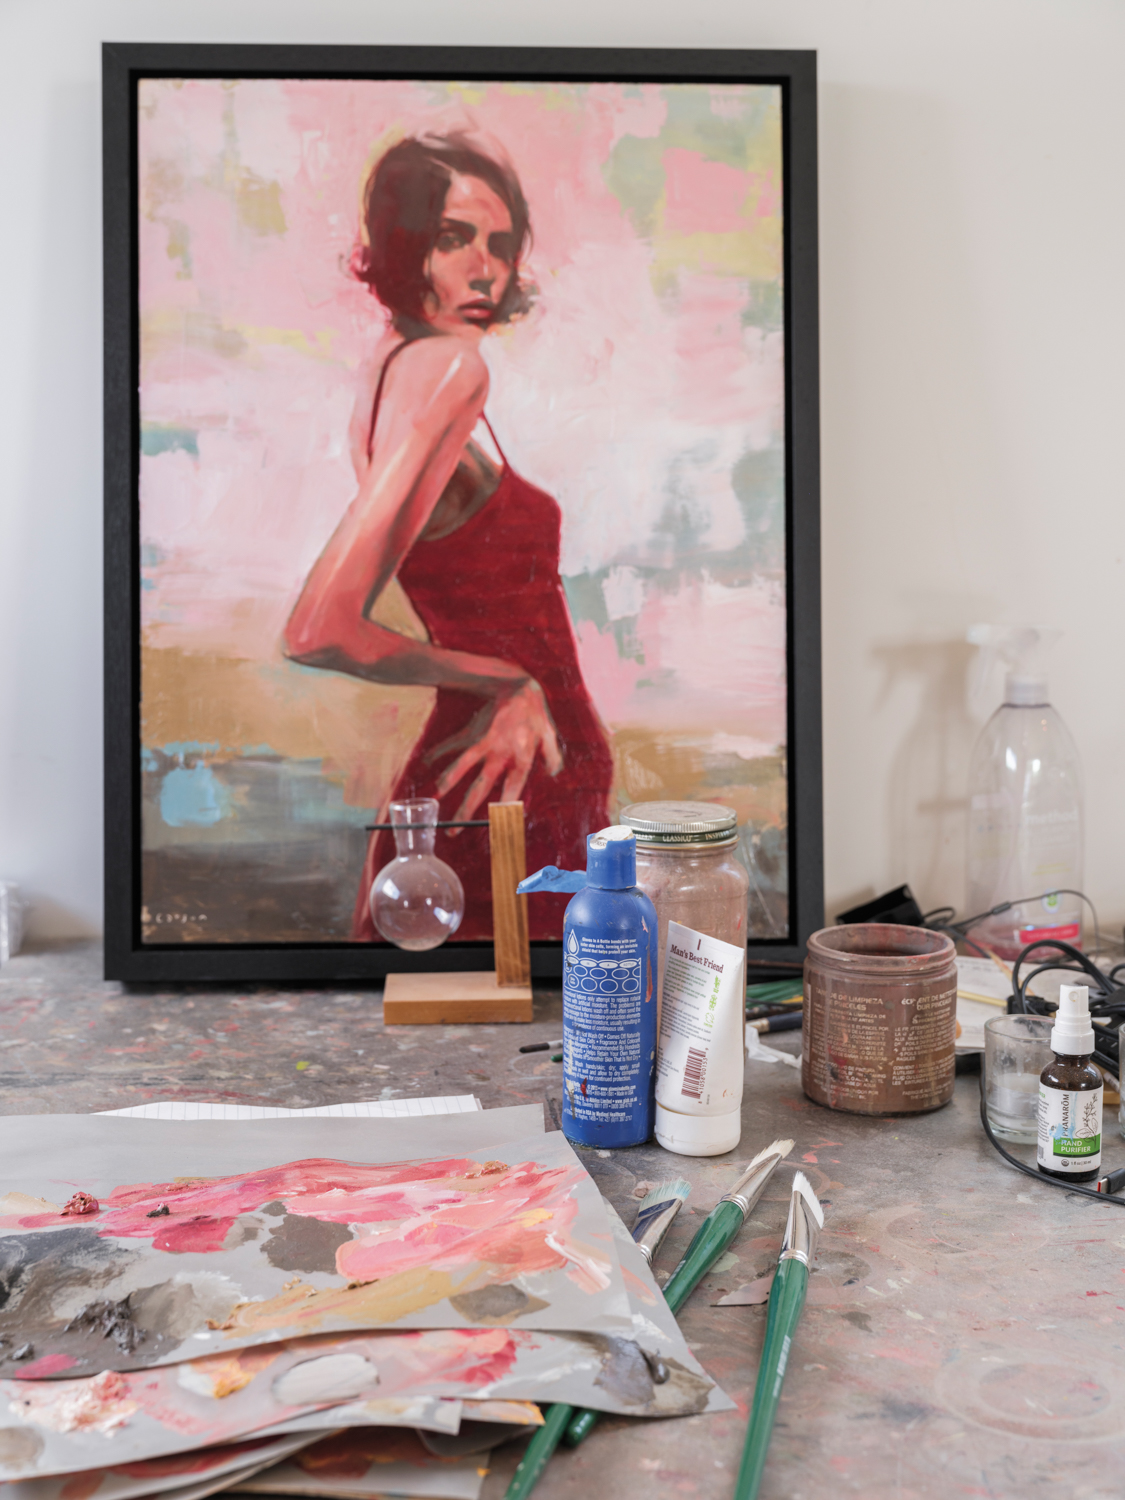 art supplies on a table in front of a painting of a brunette woman in a red dress